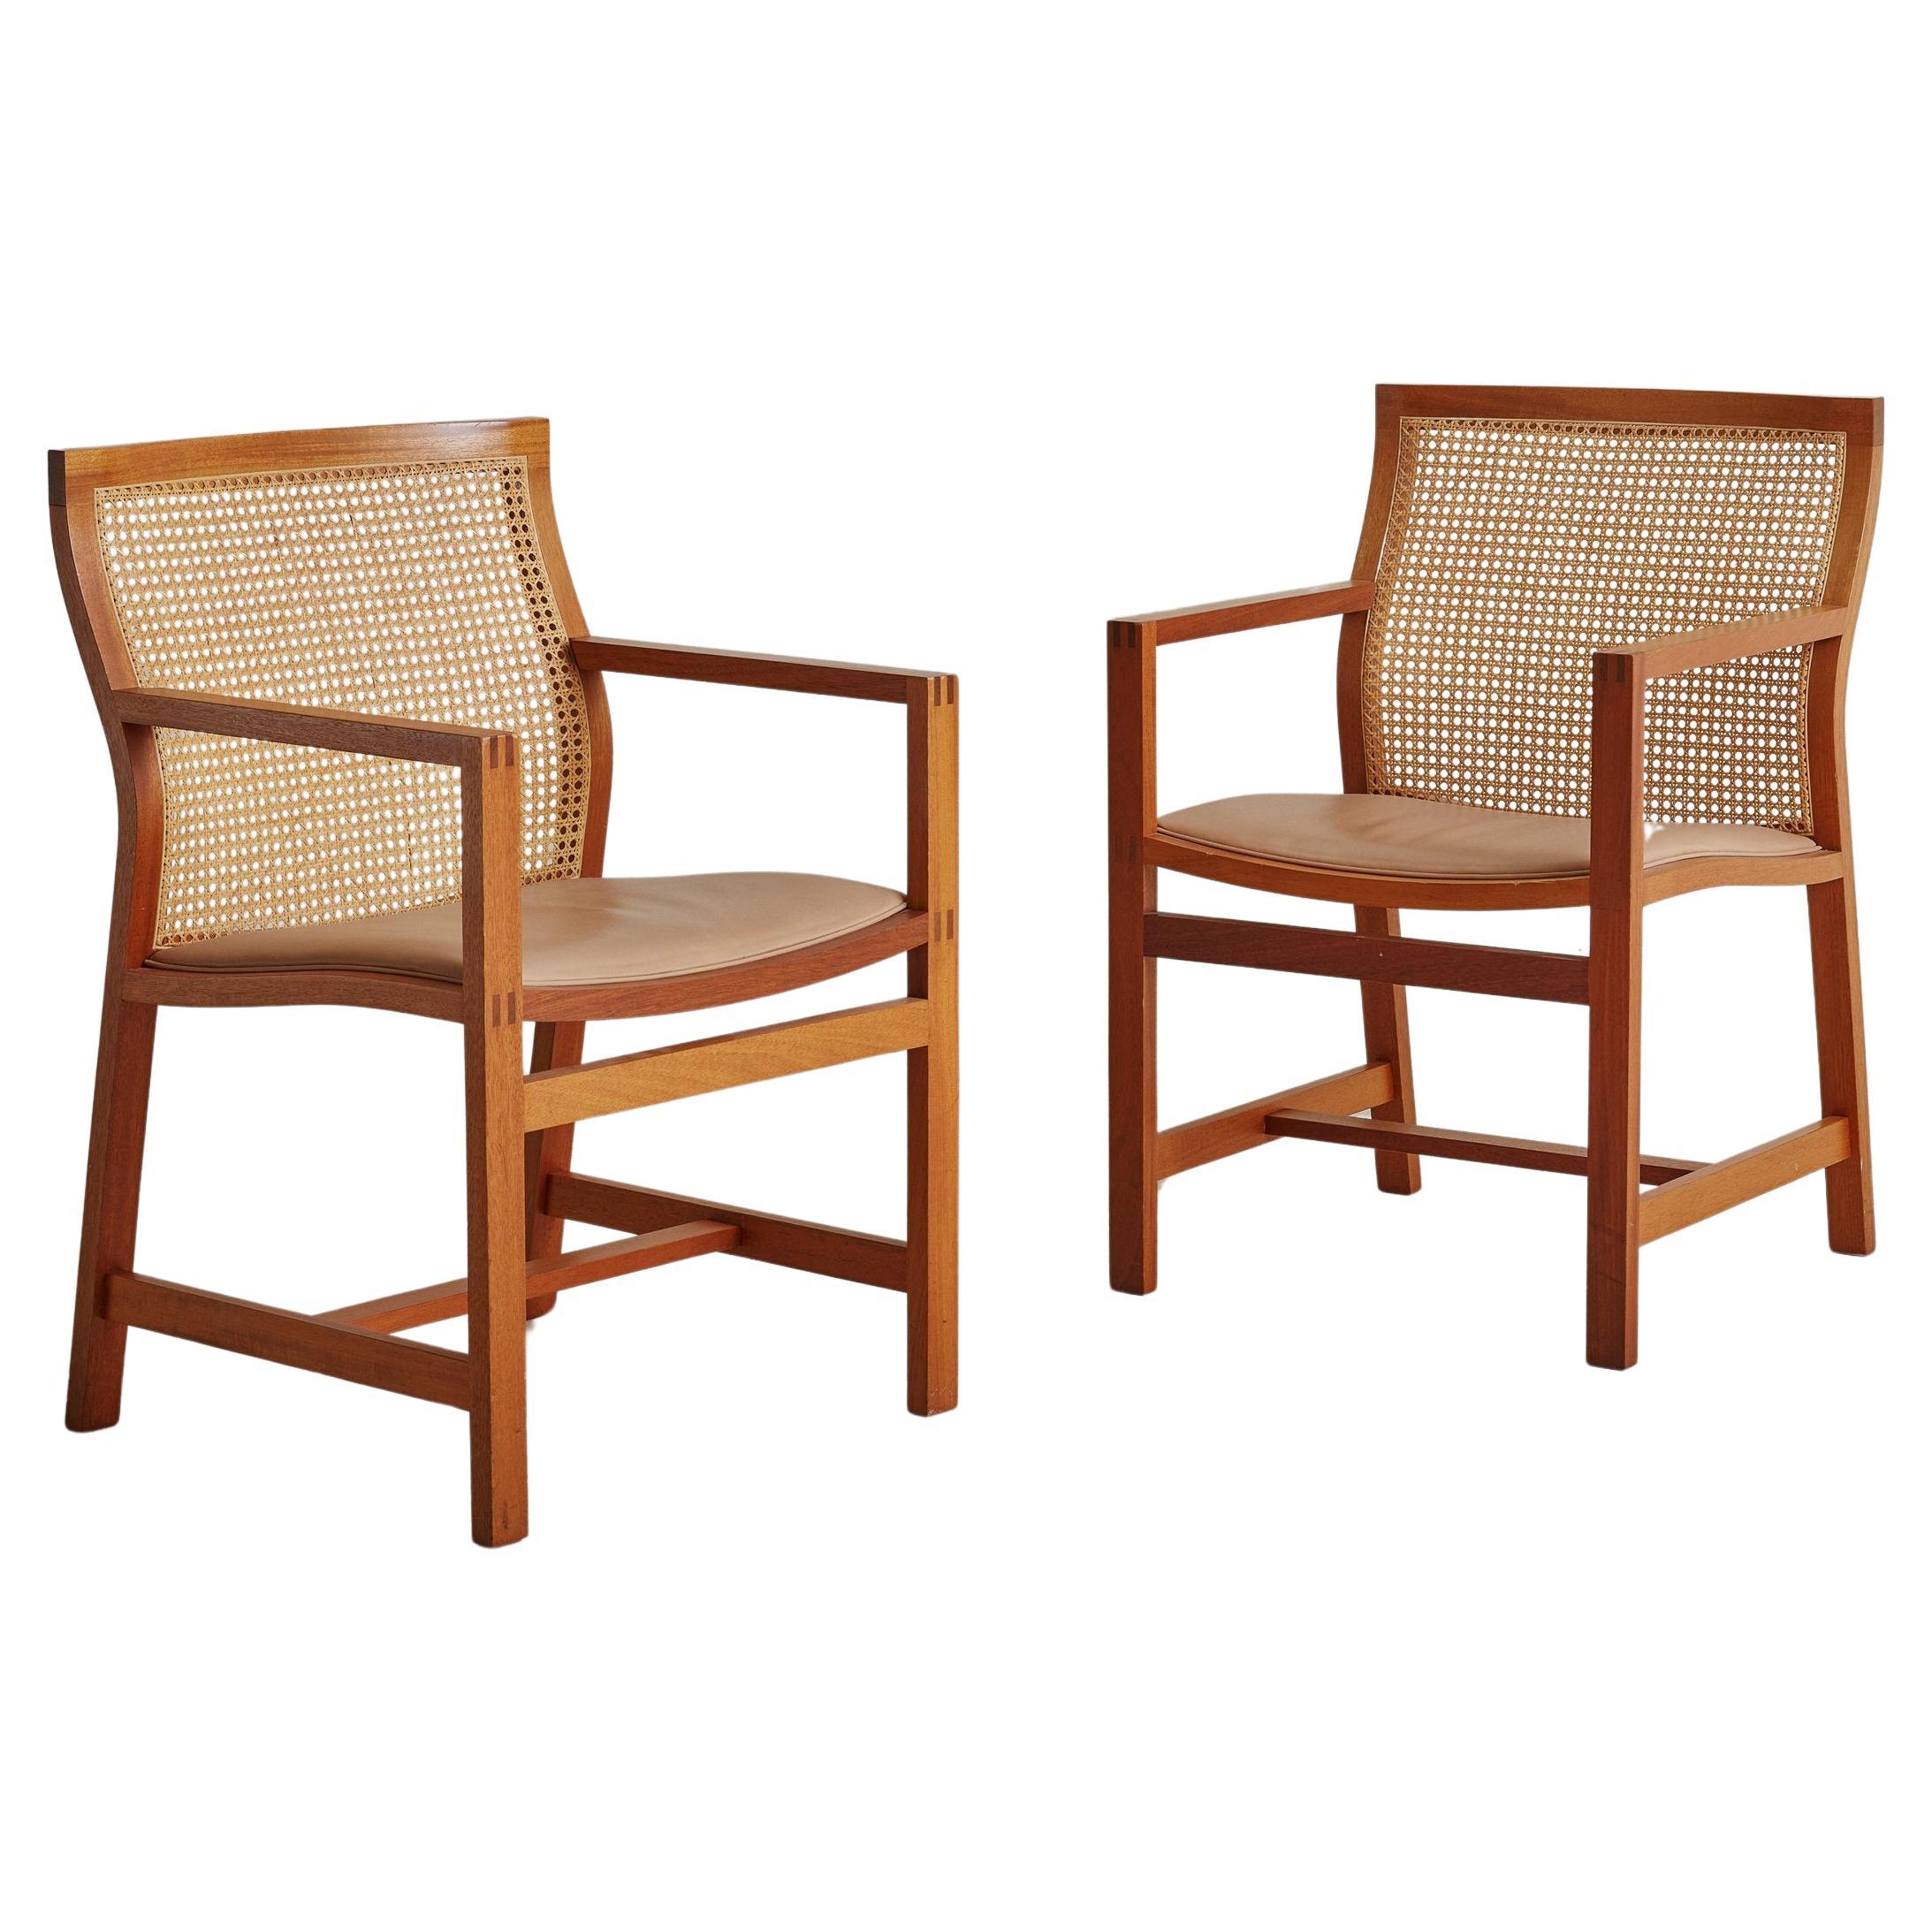 Set of 6 Cane Dining Chairs by Rud Thygesen and Johnny Sorensen for Botium 1980s